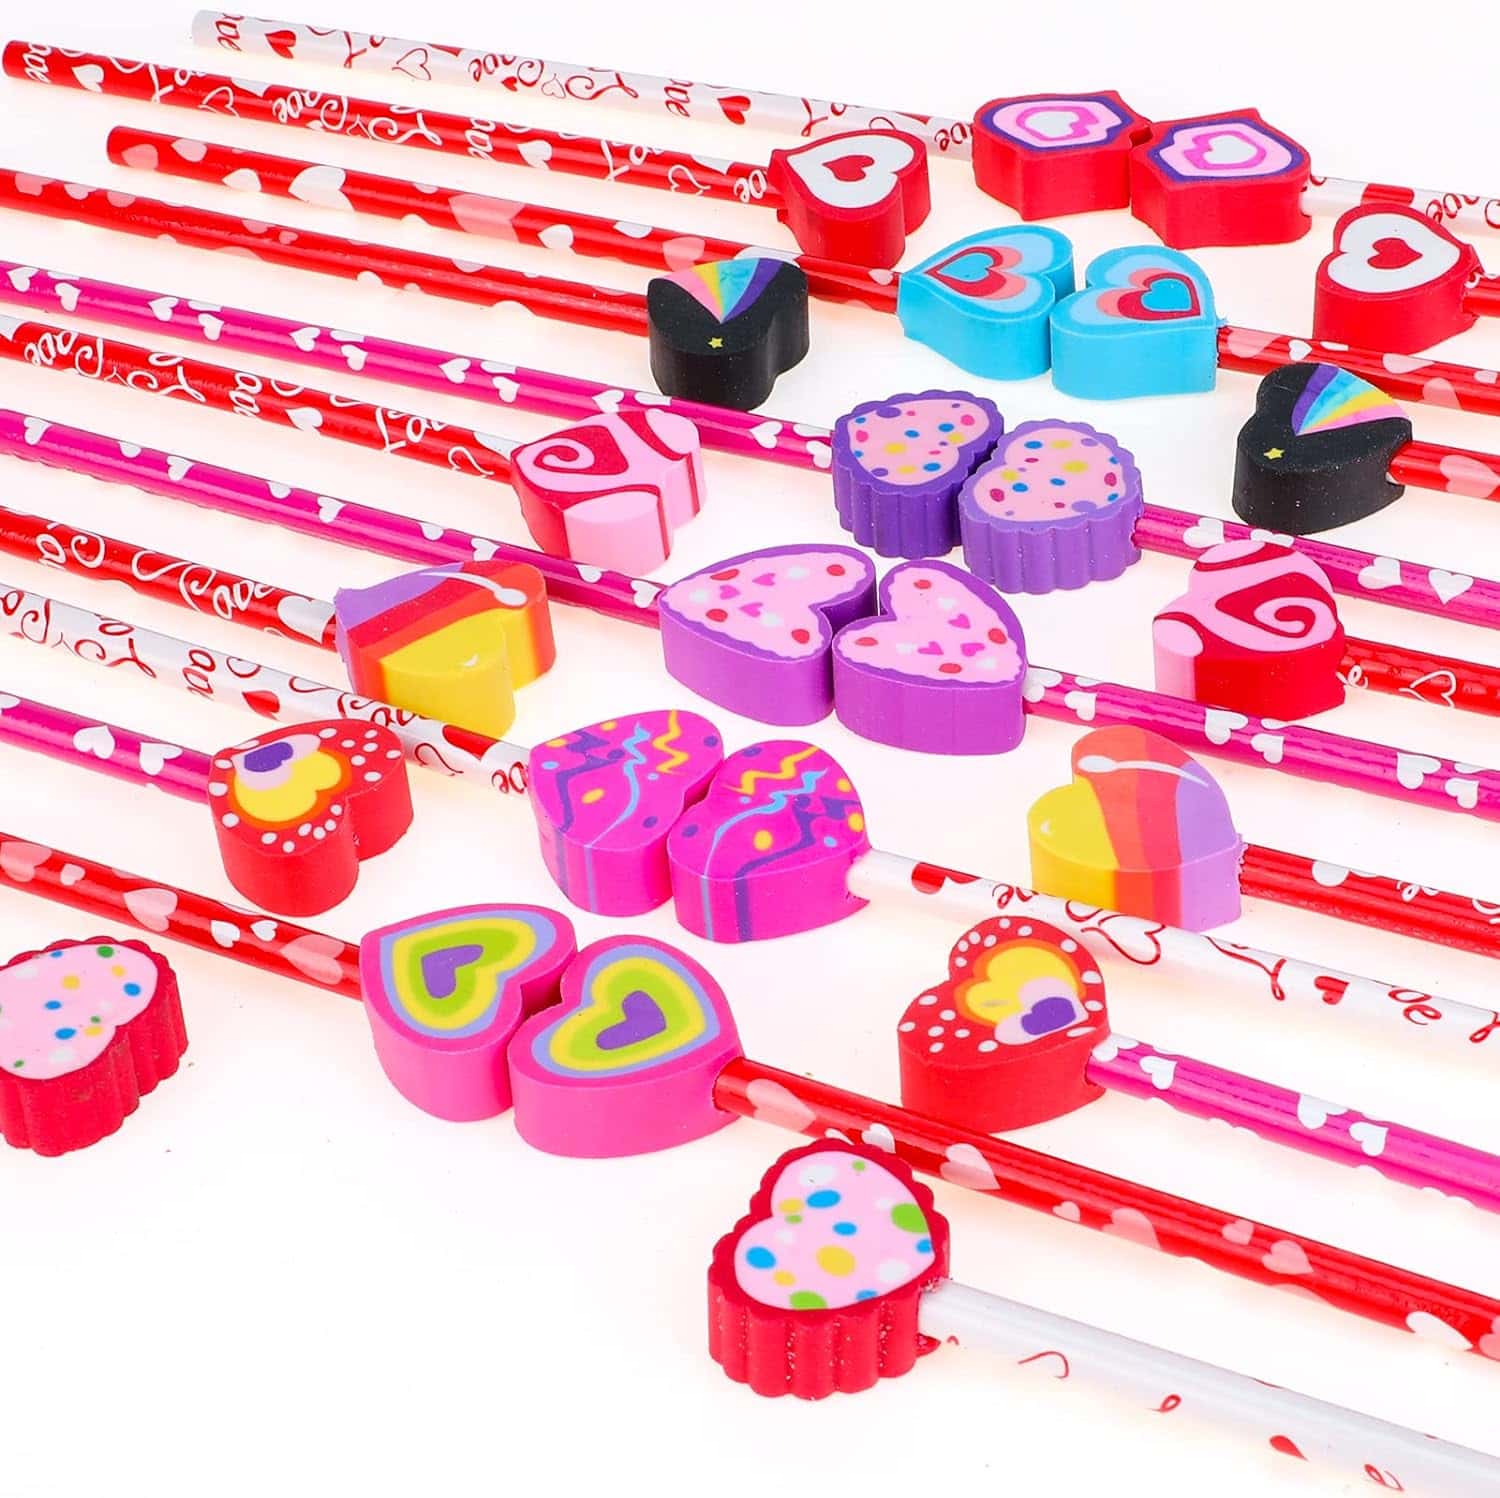 Valentine pencils with giant eraser toppers from Konsait